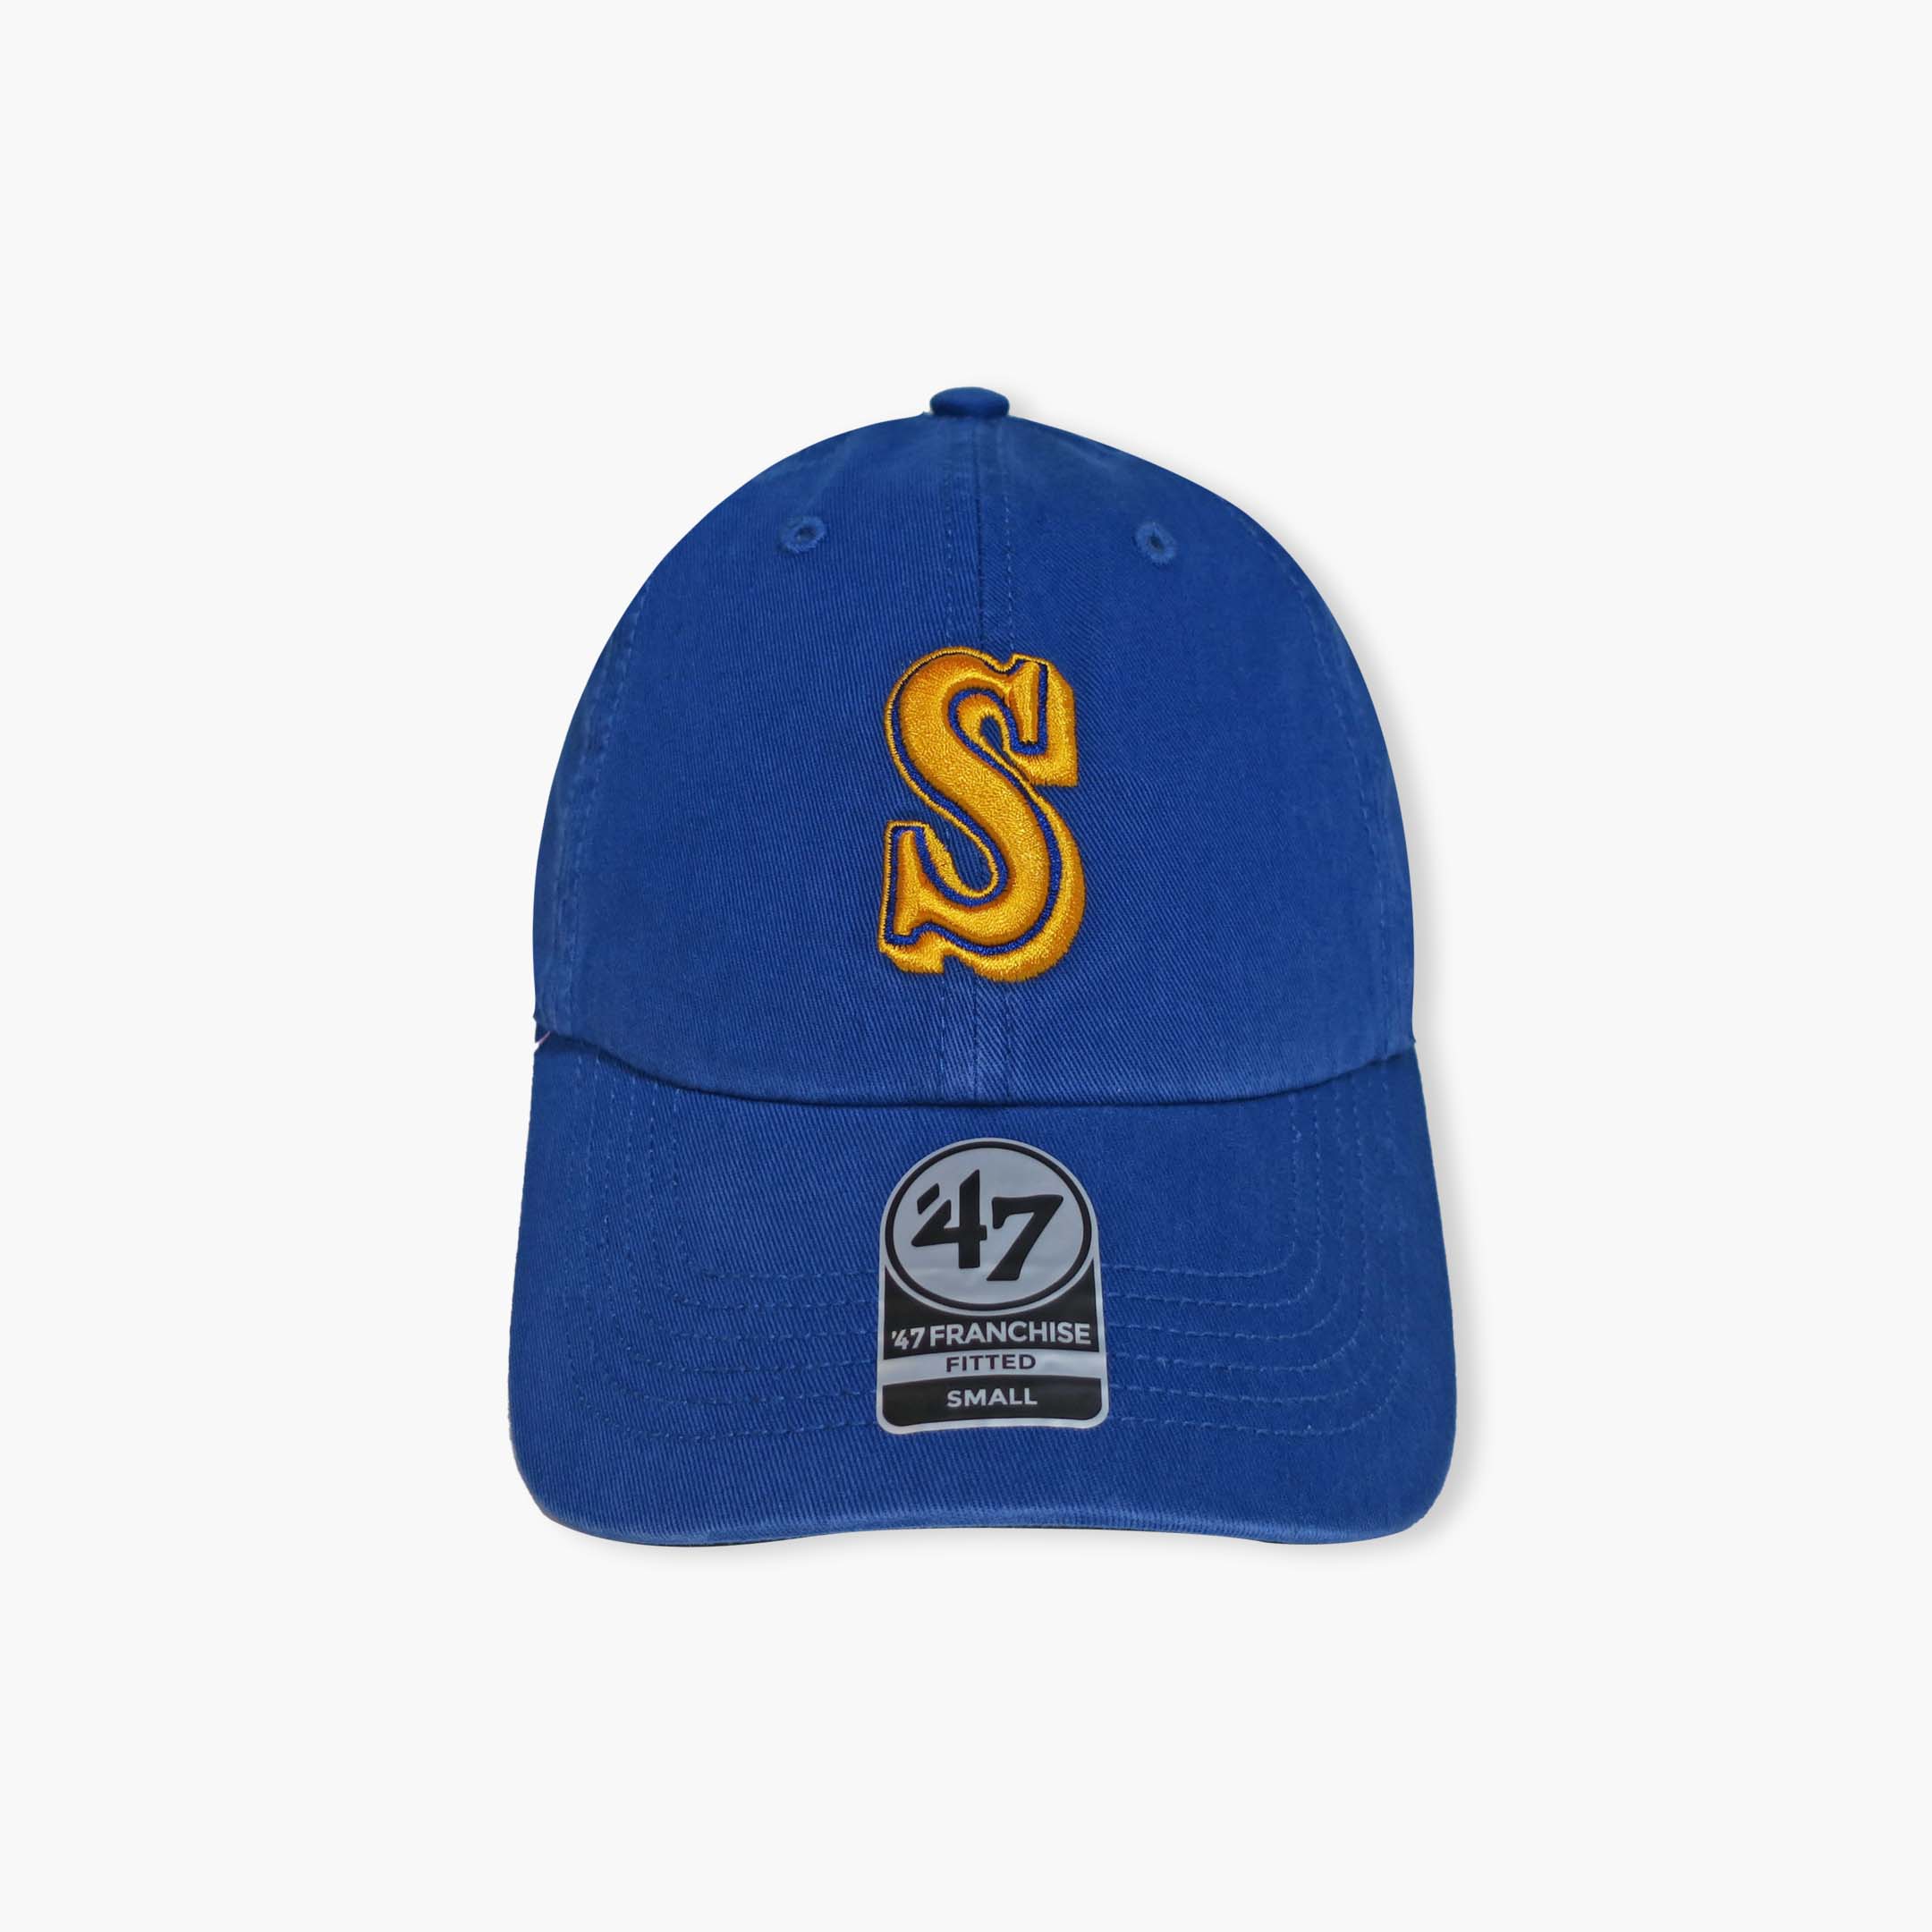  Seattle Mariners Cooperstown '47 Clean Up Adjustable Hat / Cap  : Sports & Outdoors